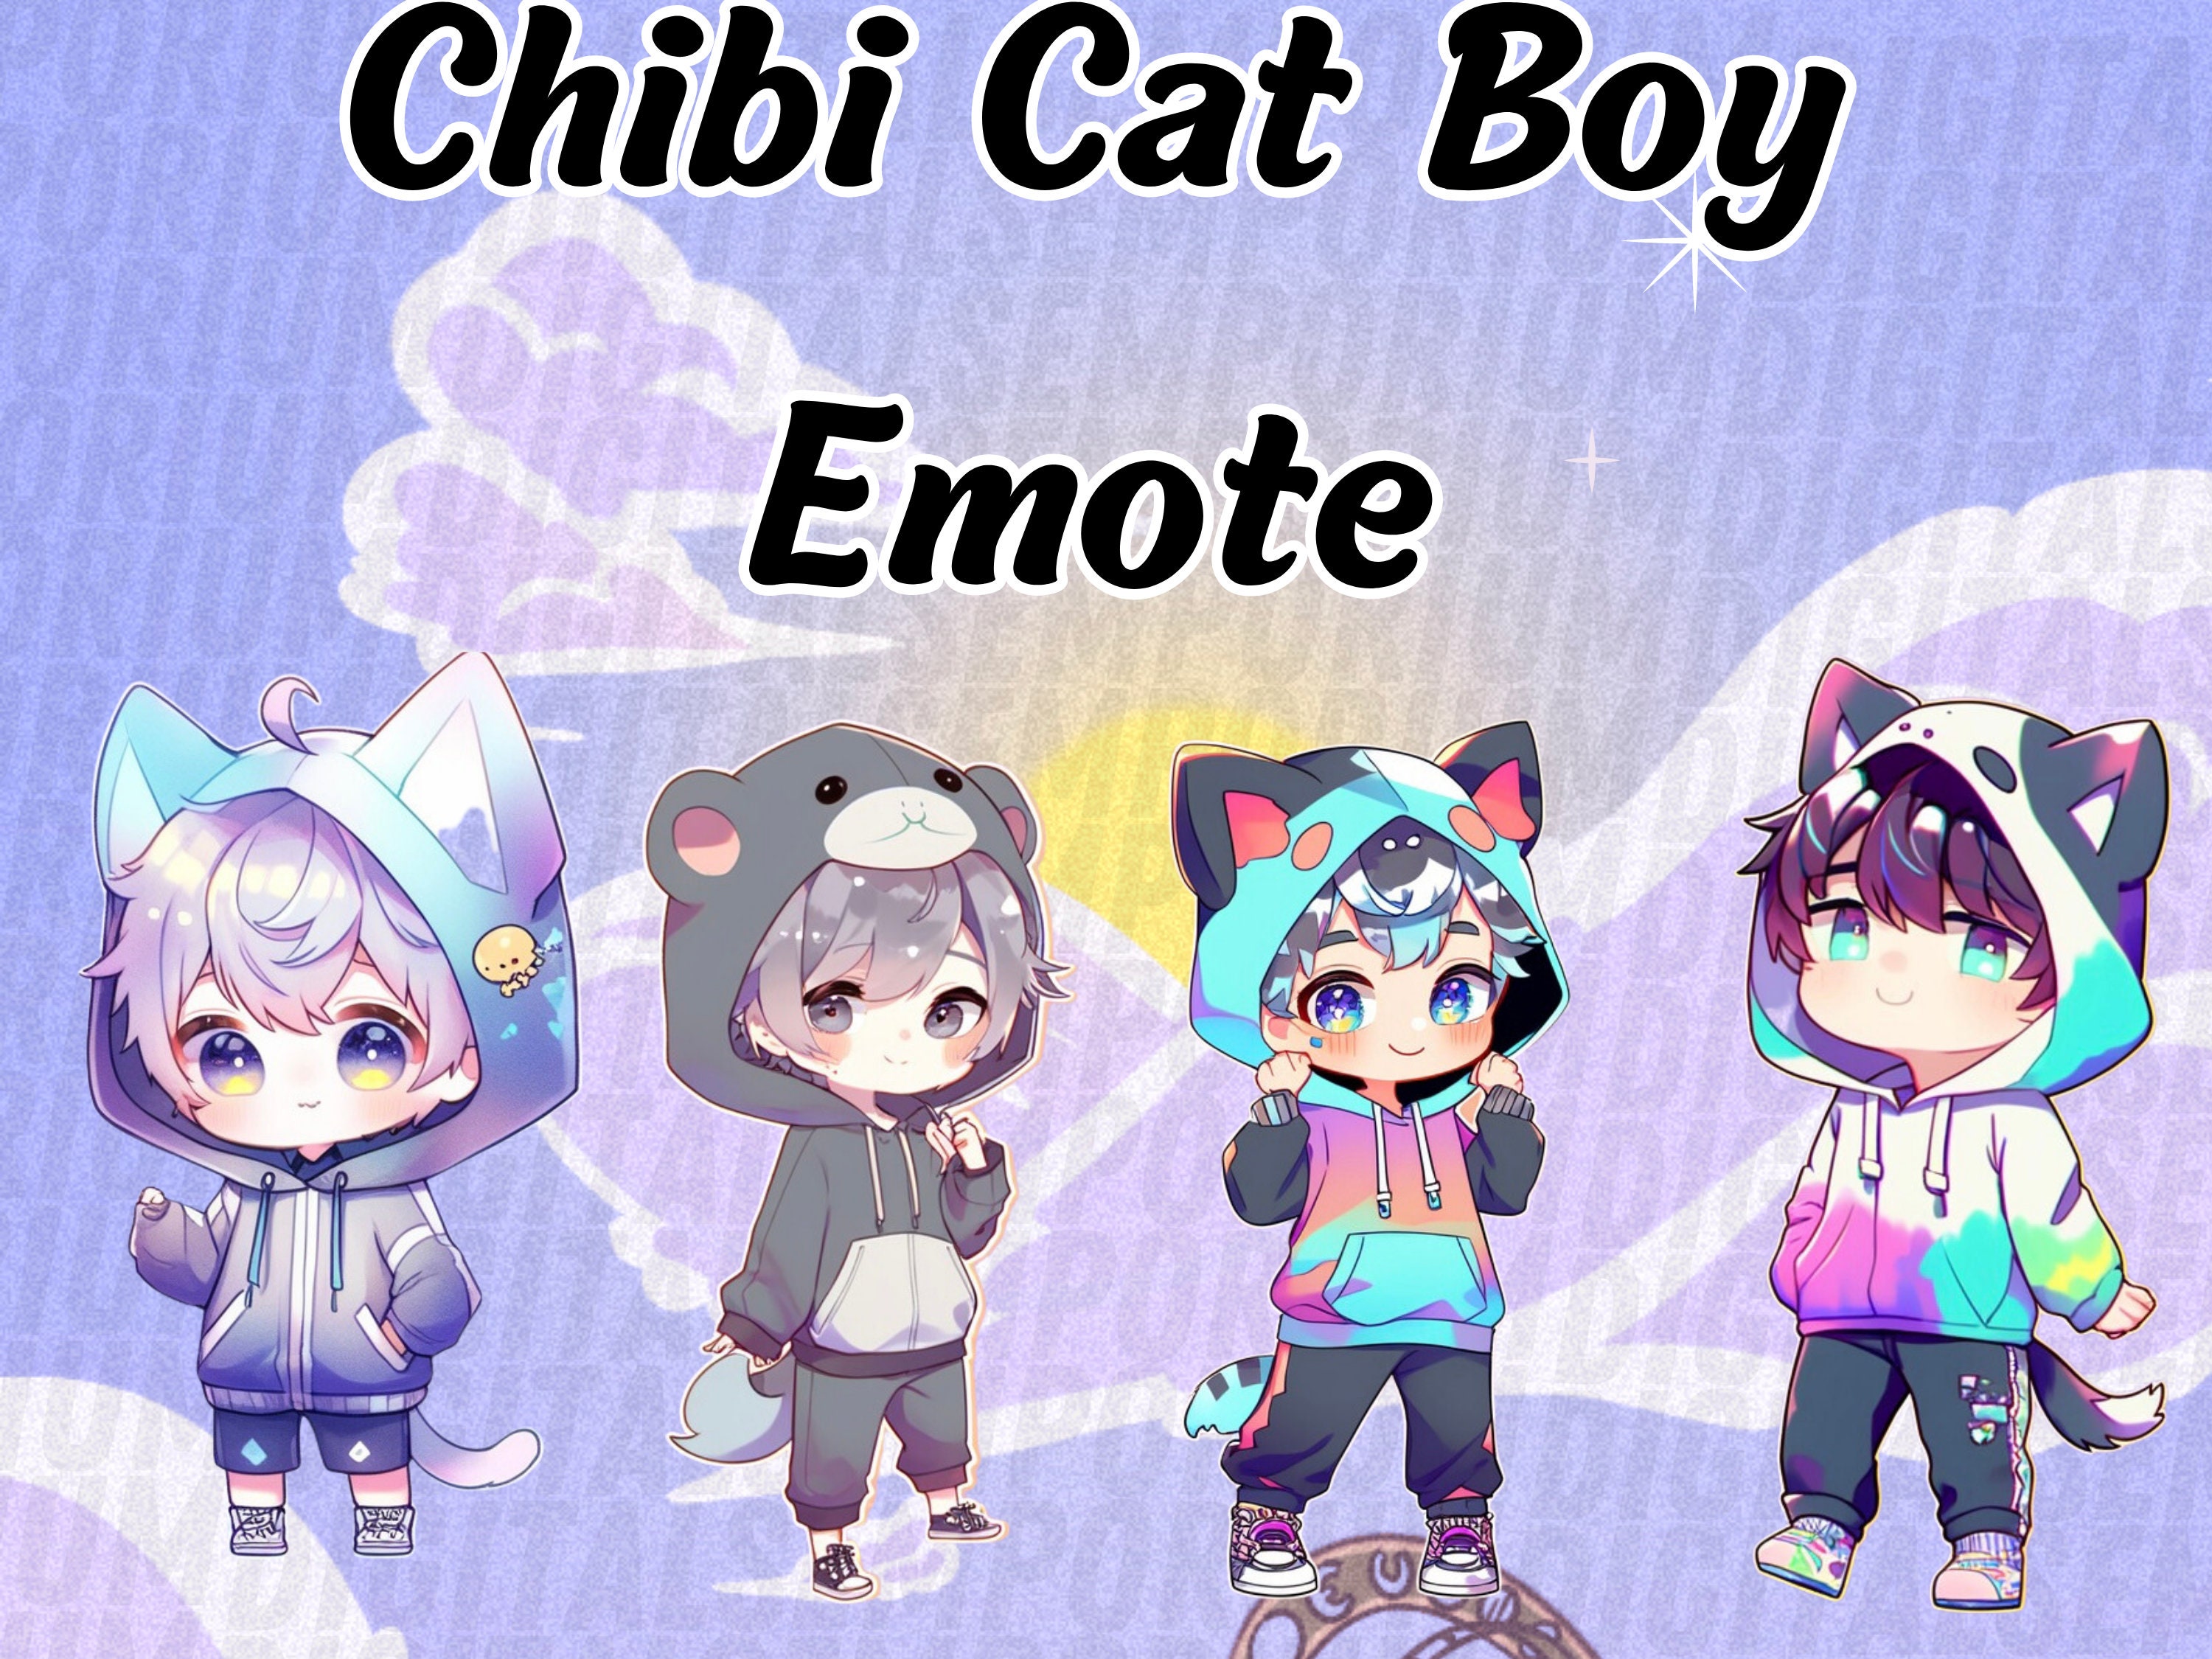 Chibi Anime Boy with Blue Hair - wide 1